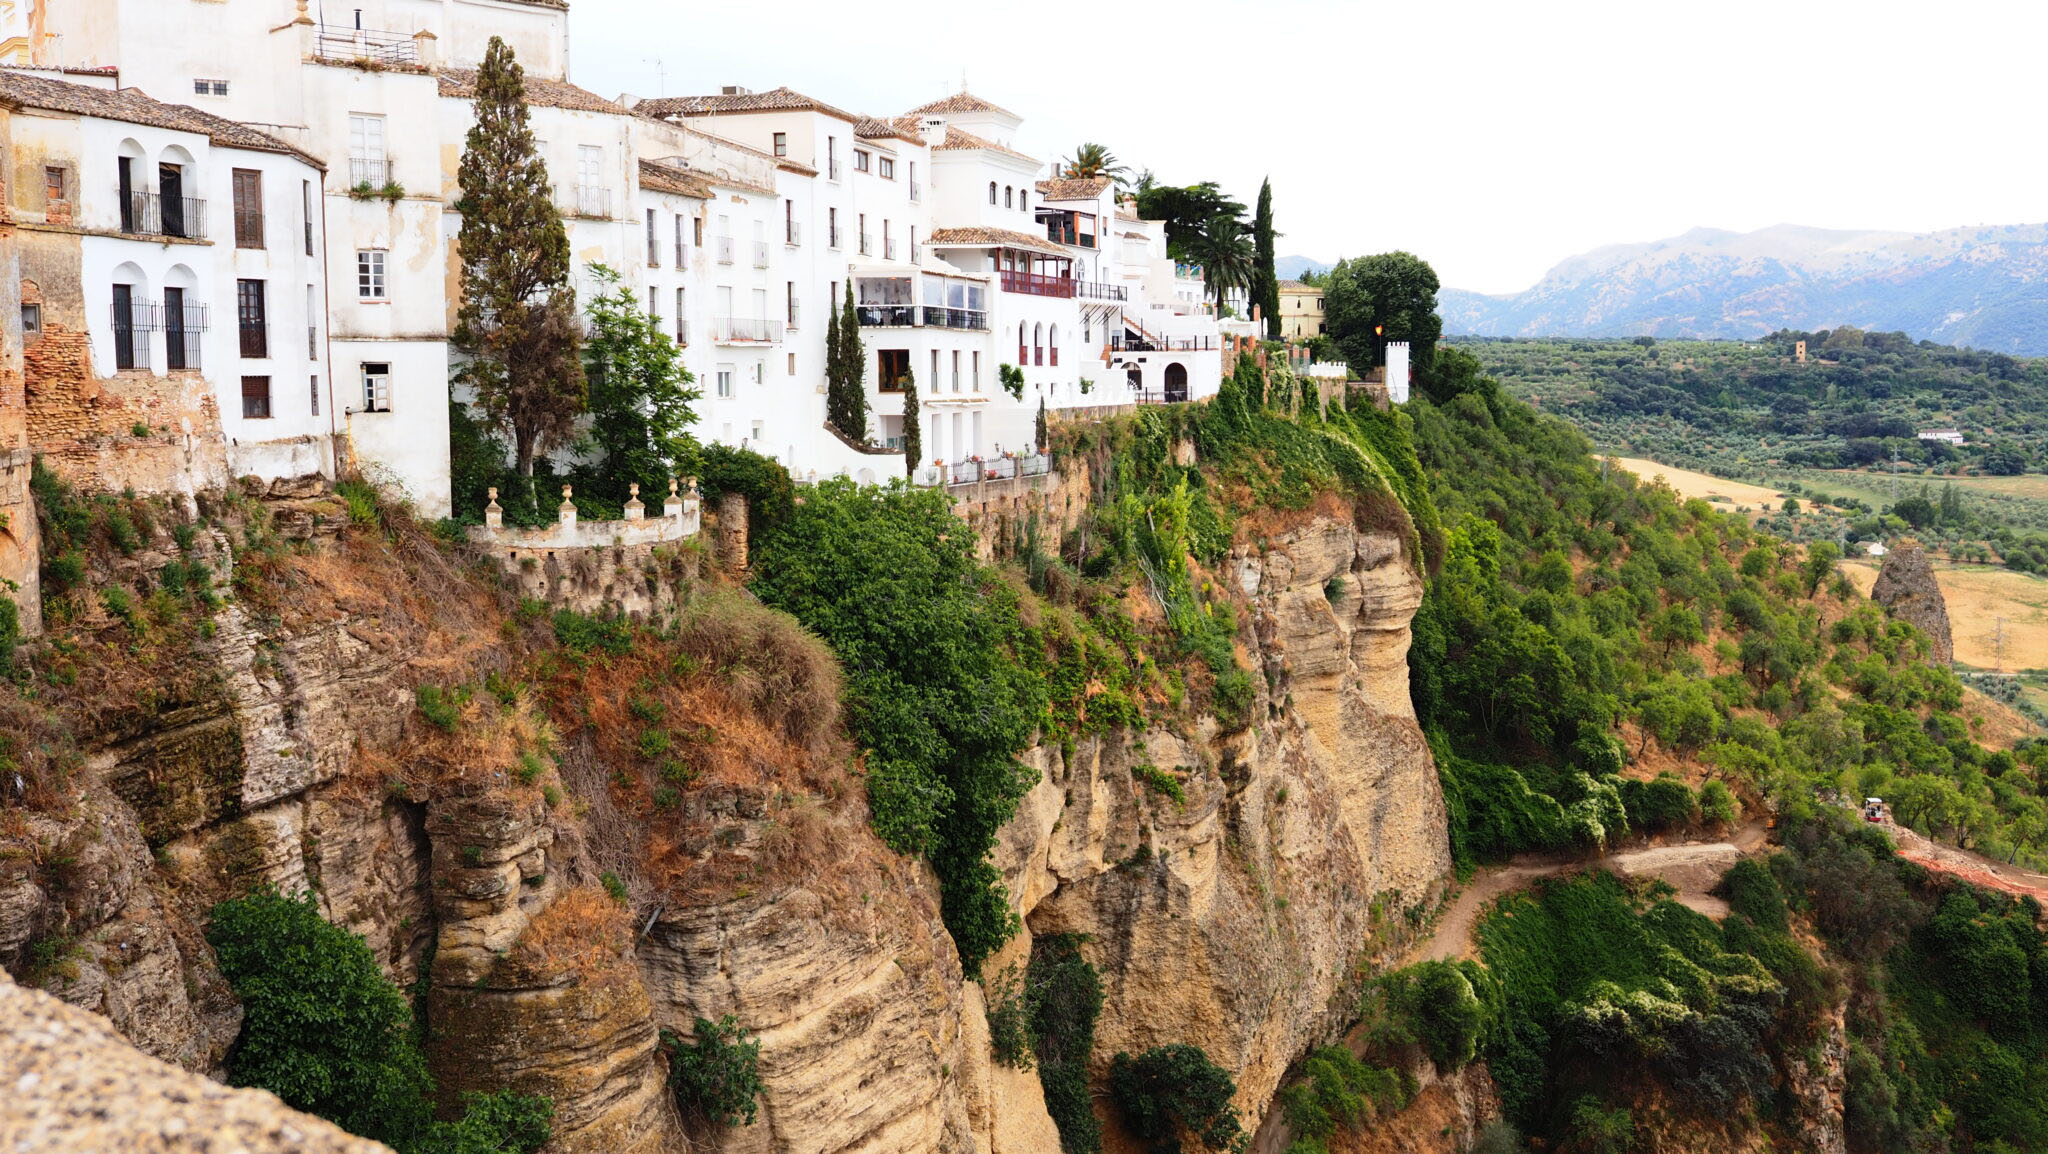 Sights in the fantastic mountain town of Ronda